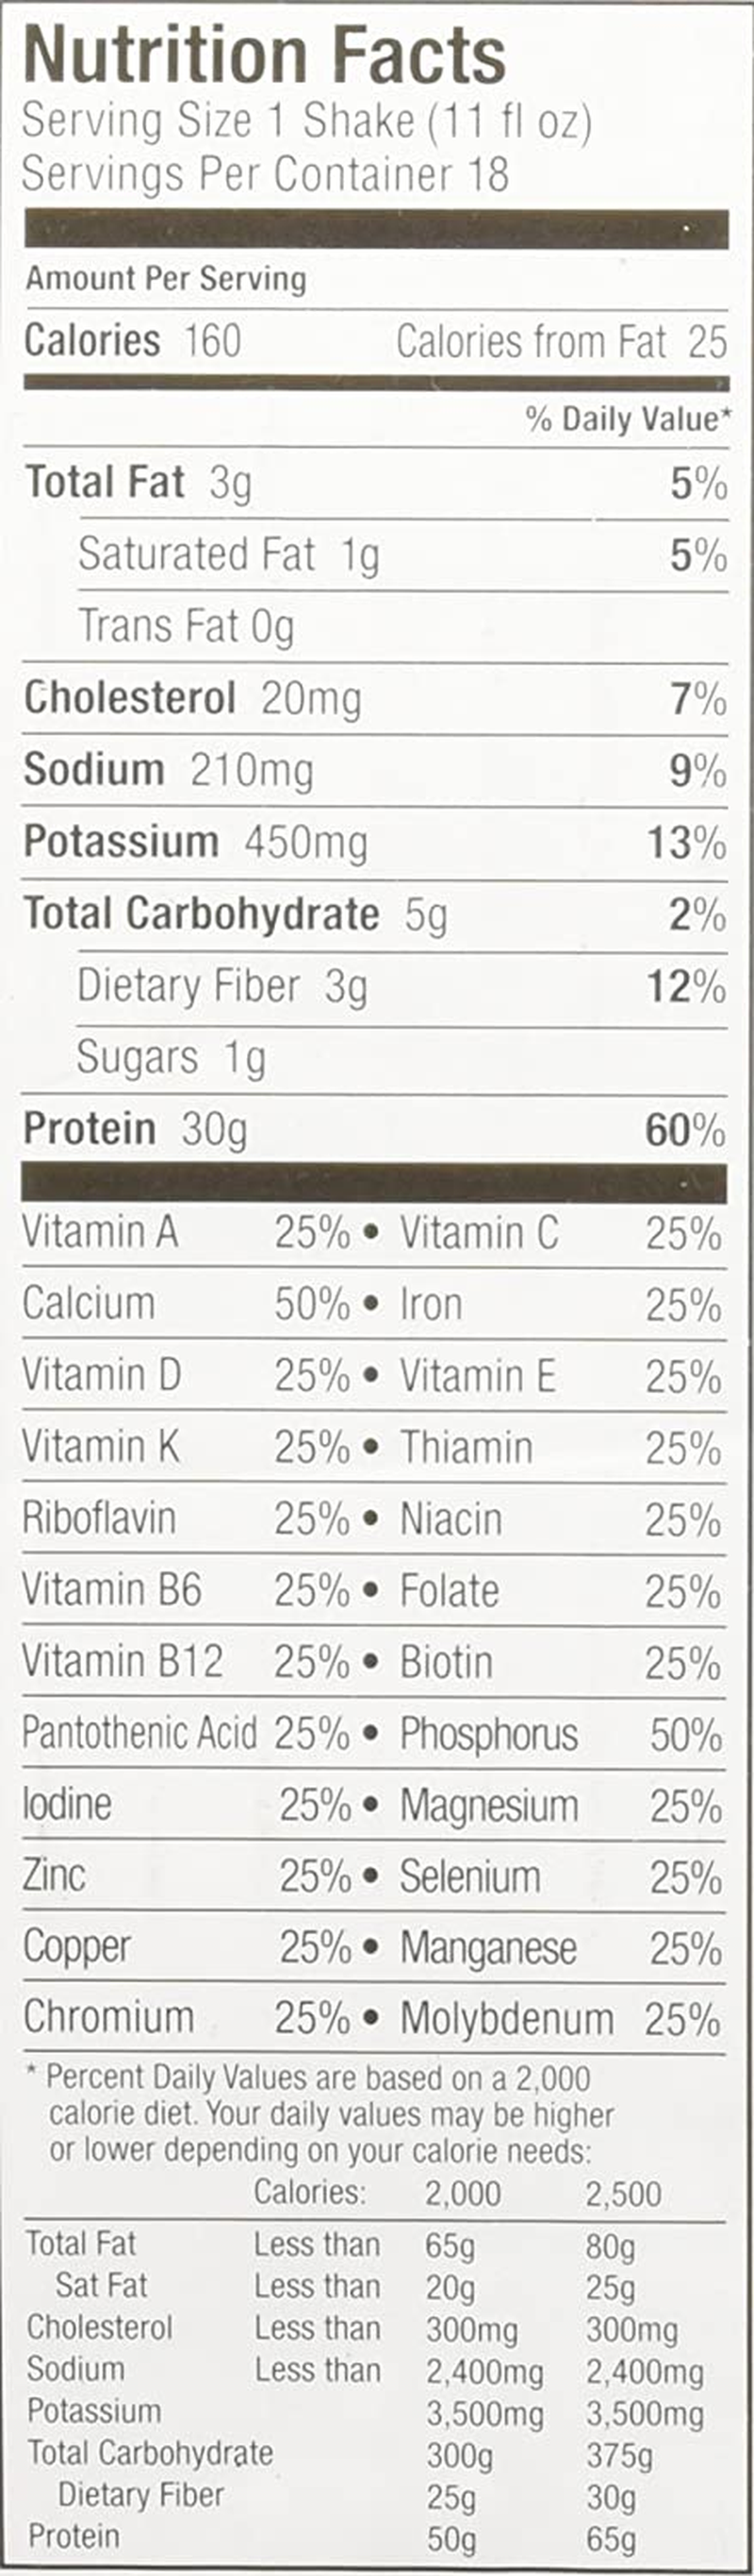 Premier Nutrition High Protein Shake, Chocolate 11 Oz, 18Count